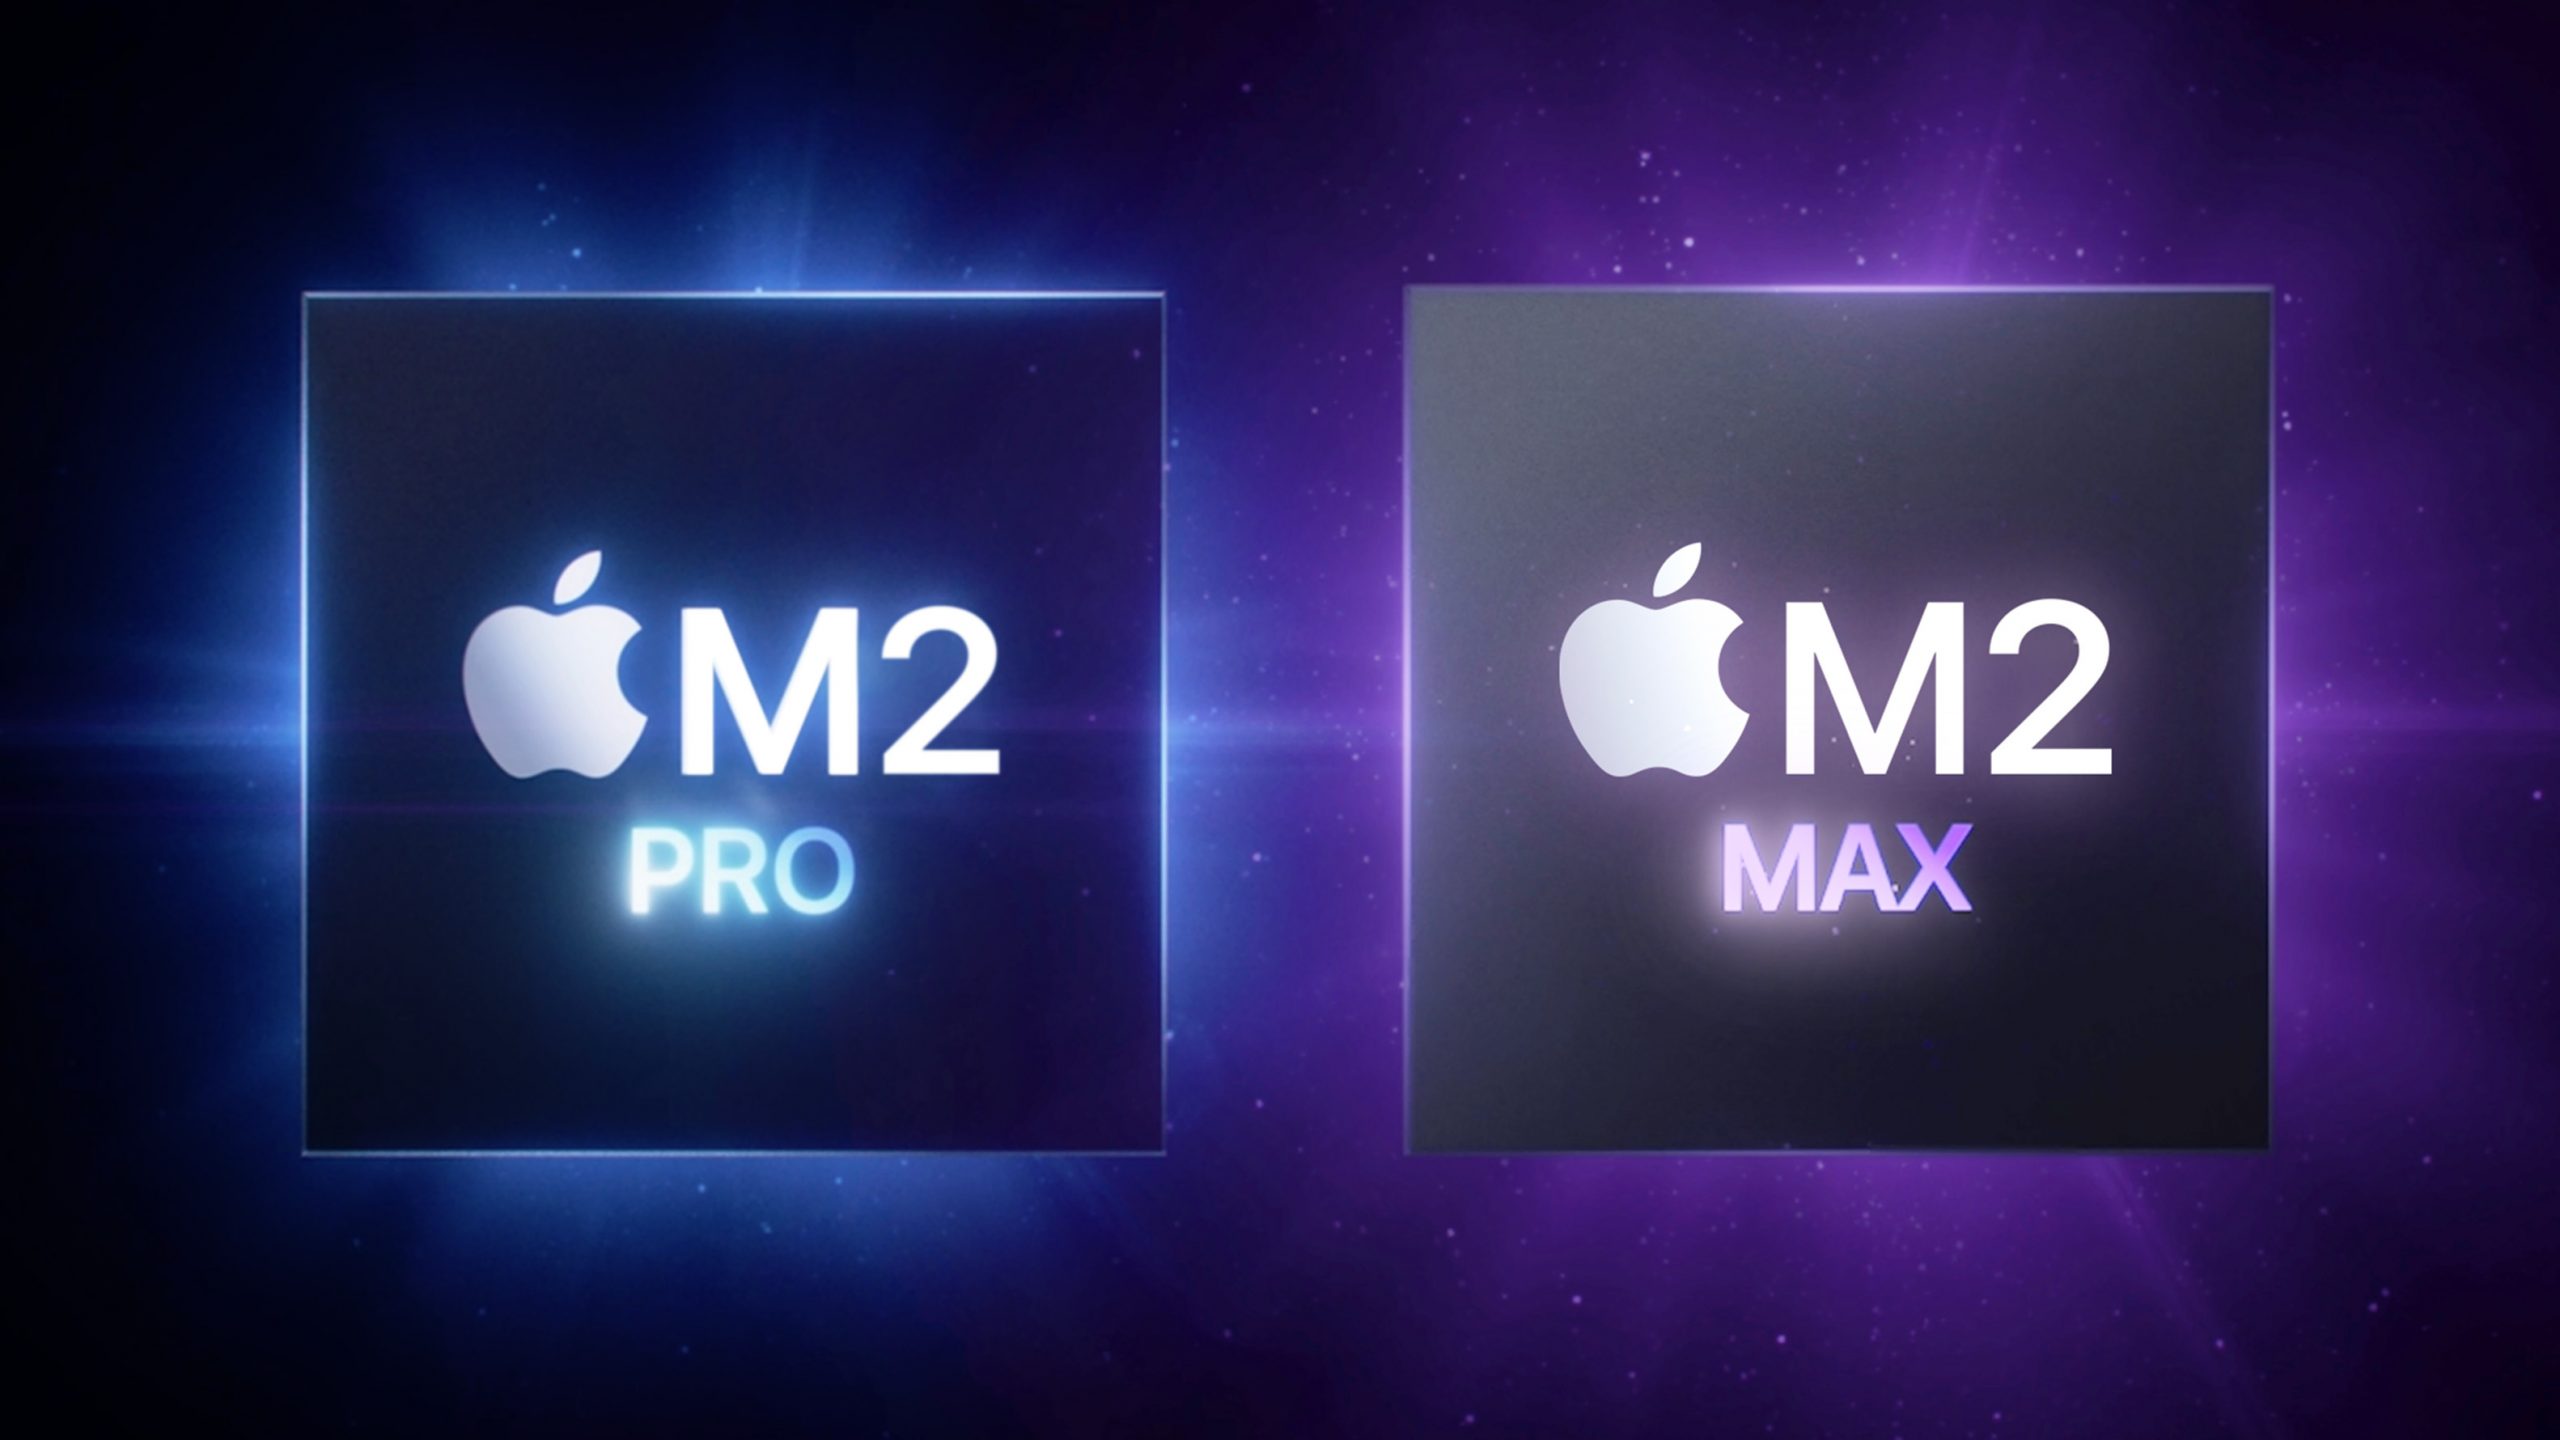 Benchmark Results Reveal Graphics Performance of M2 Pro and M2 Max Chips